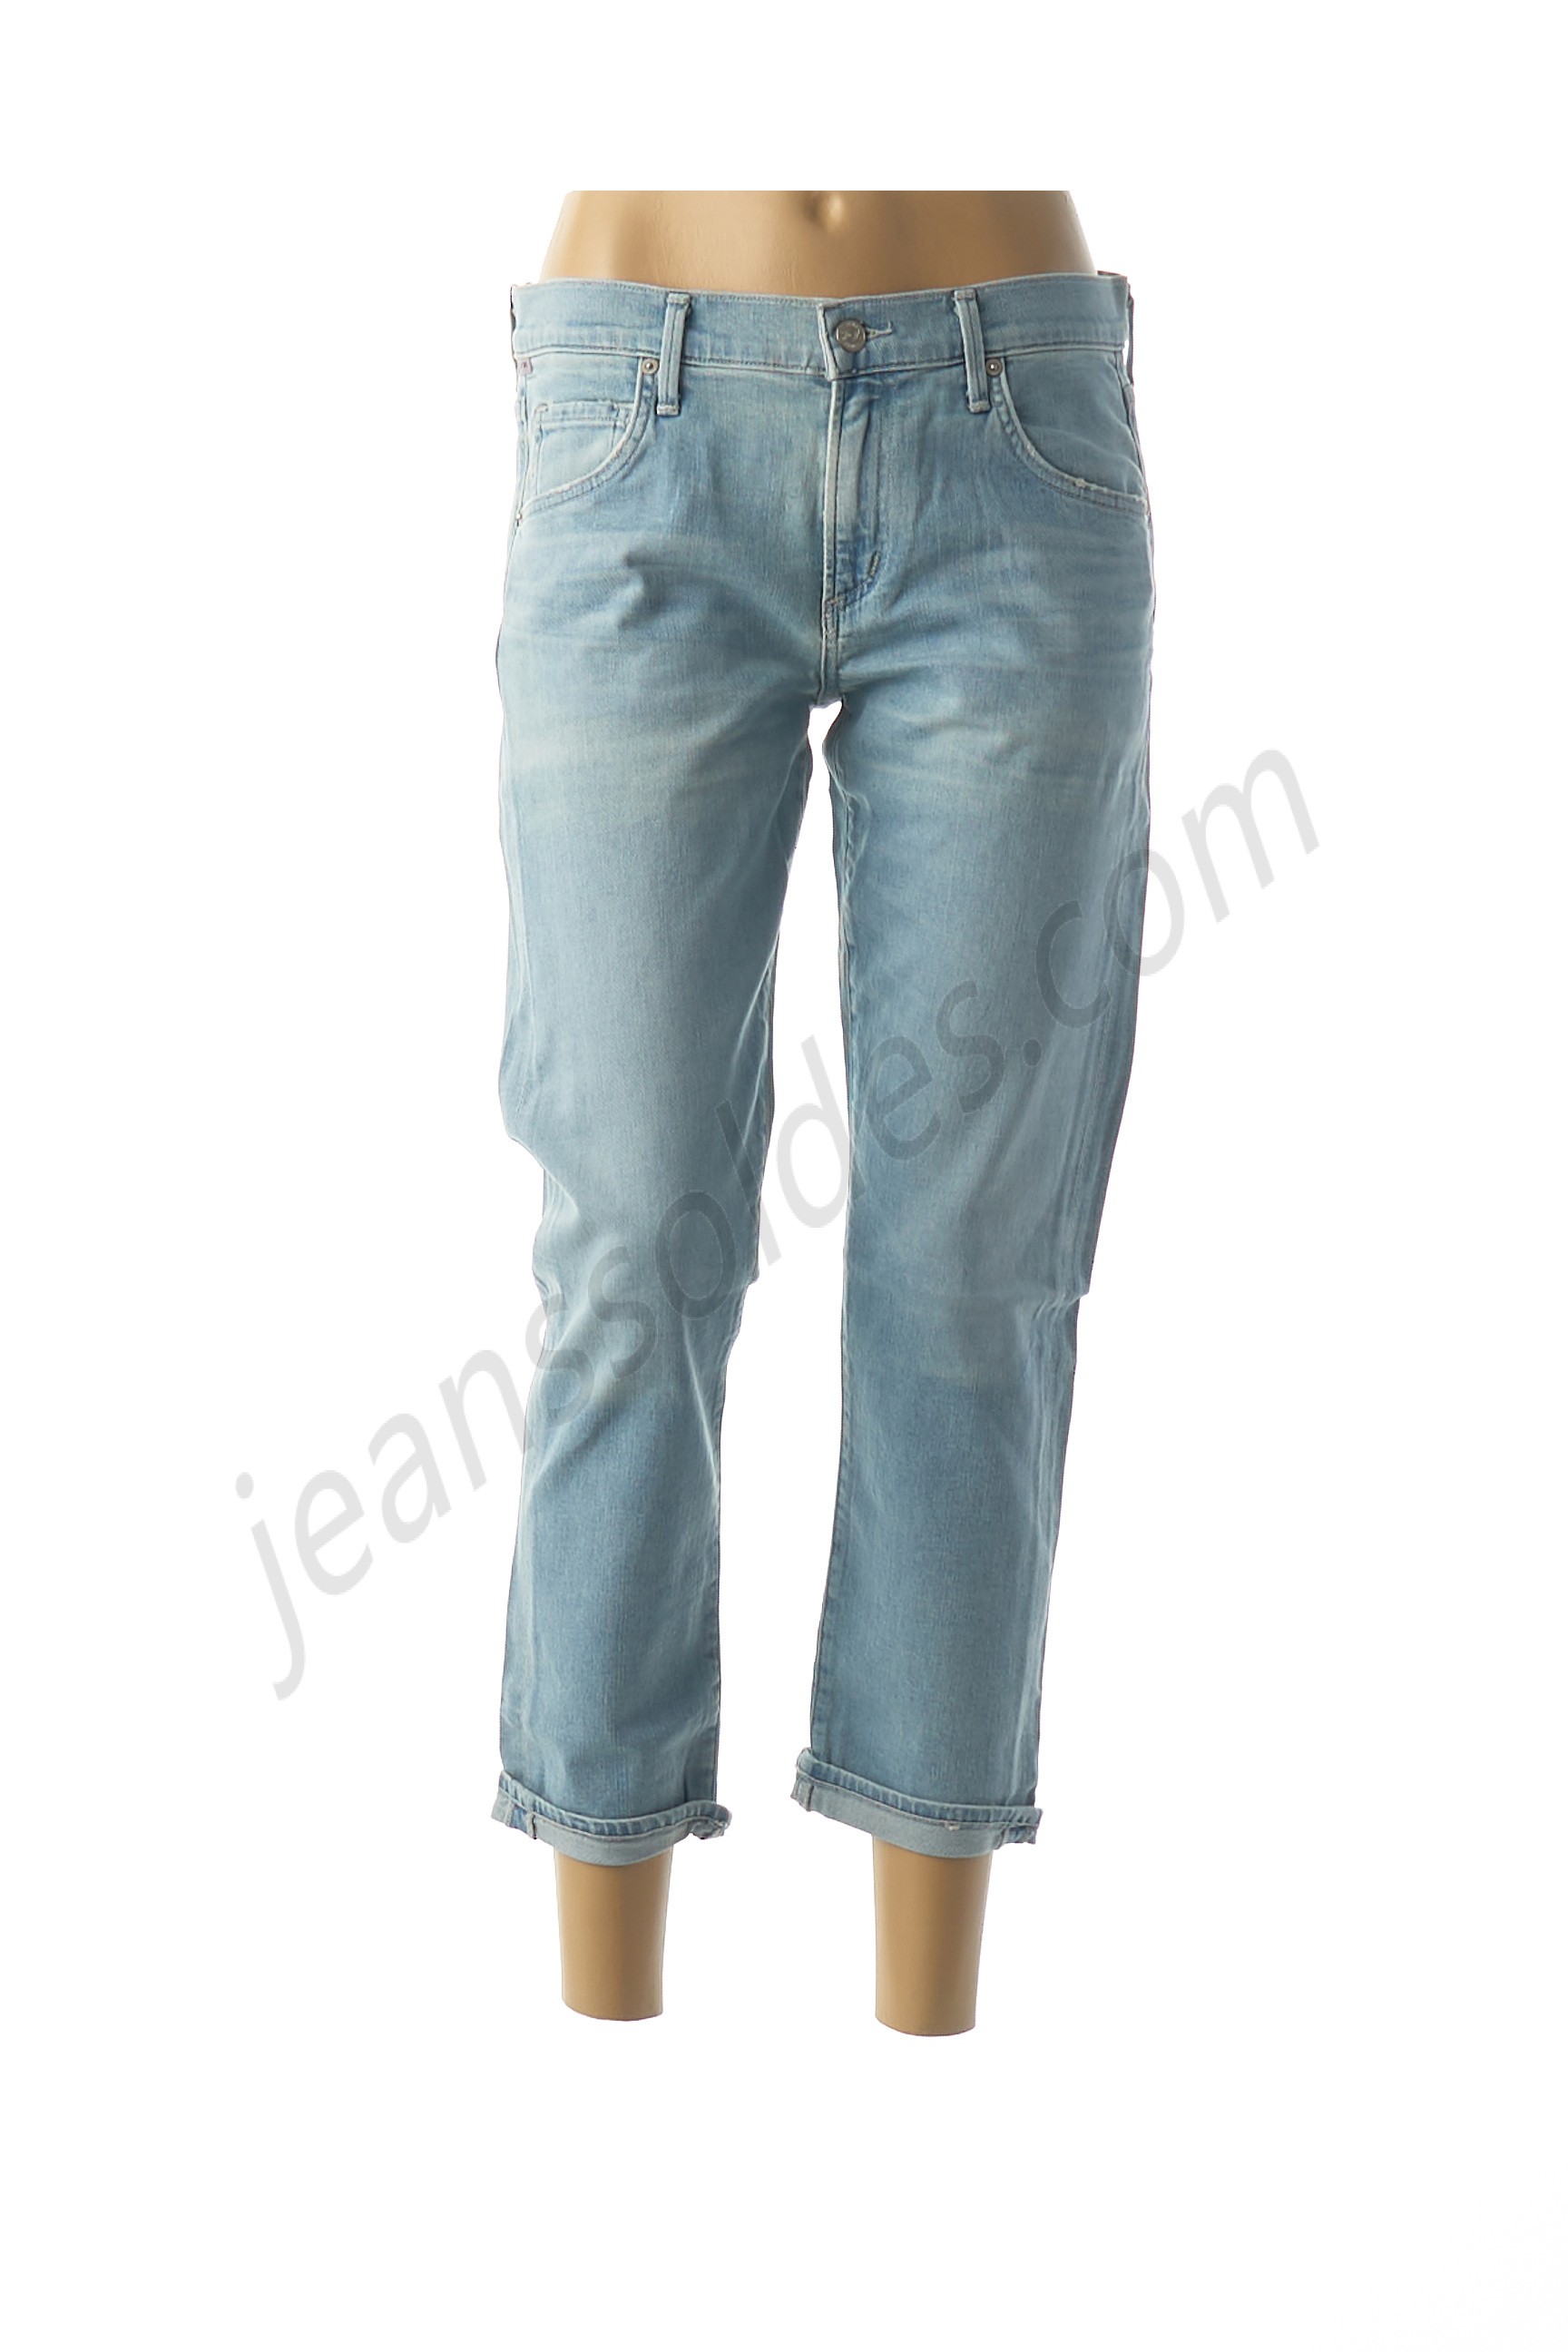 citizens of humanity-Jeans coupe slim prix d’amis - citizens of humanity-Jeans coupe slim prix d’amis